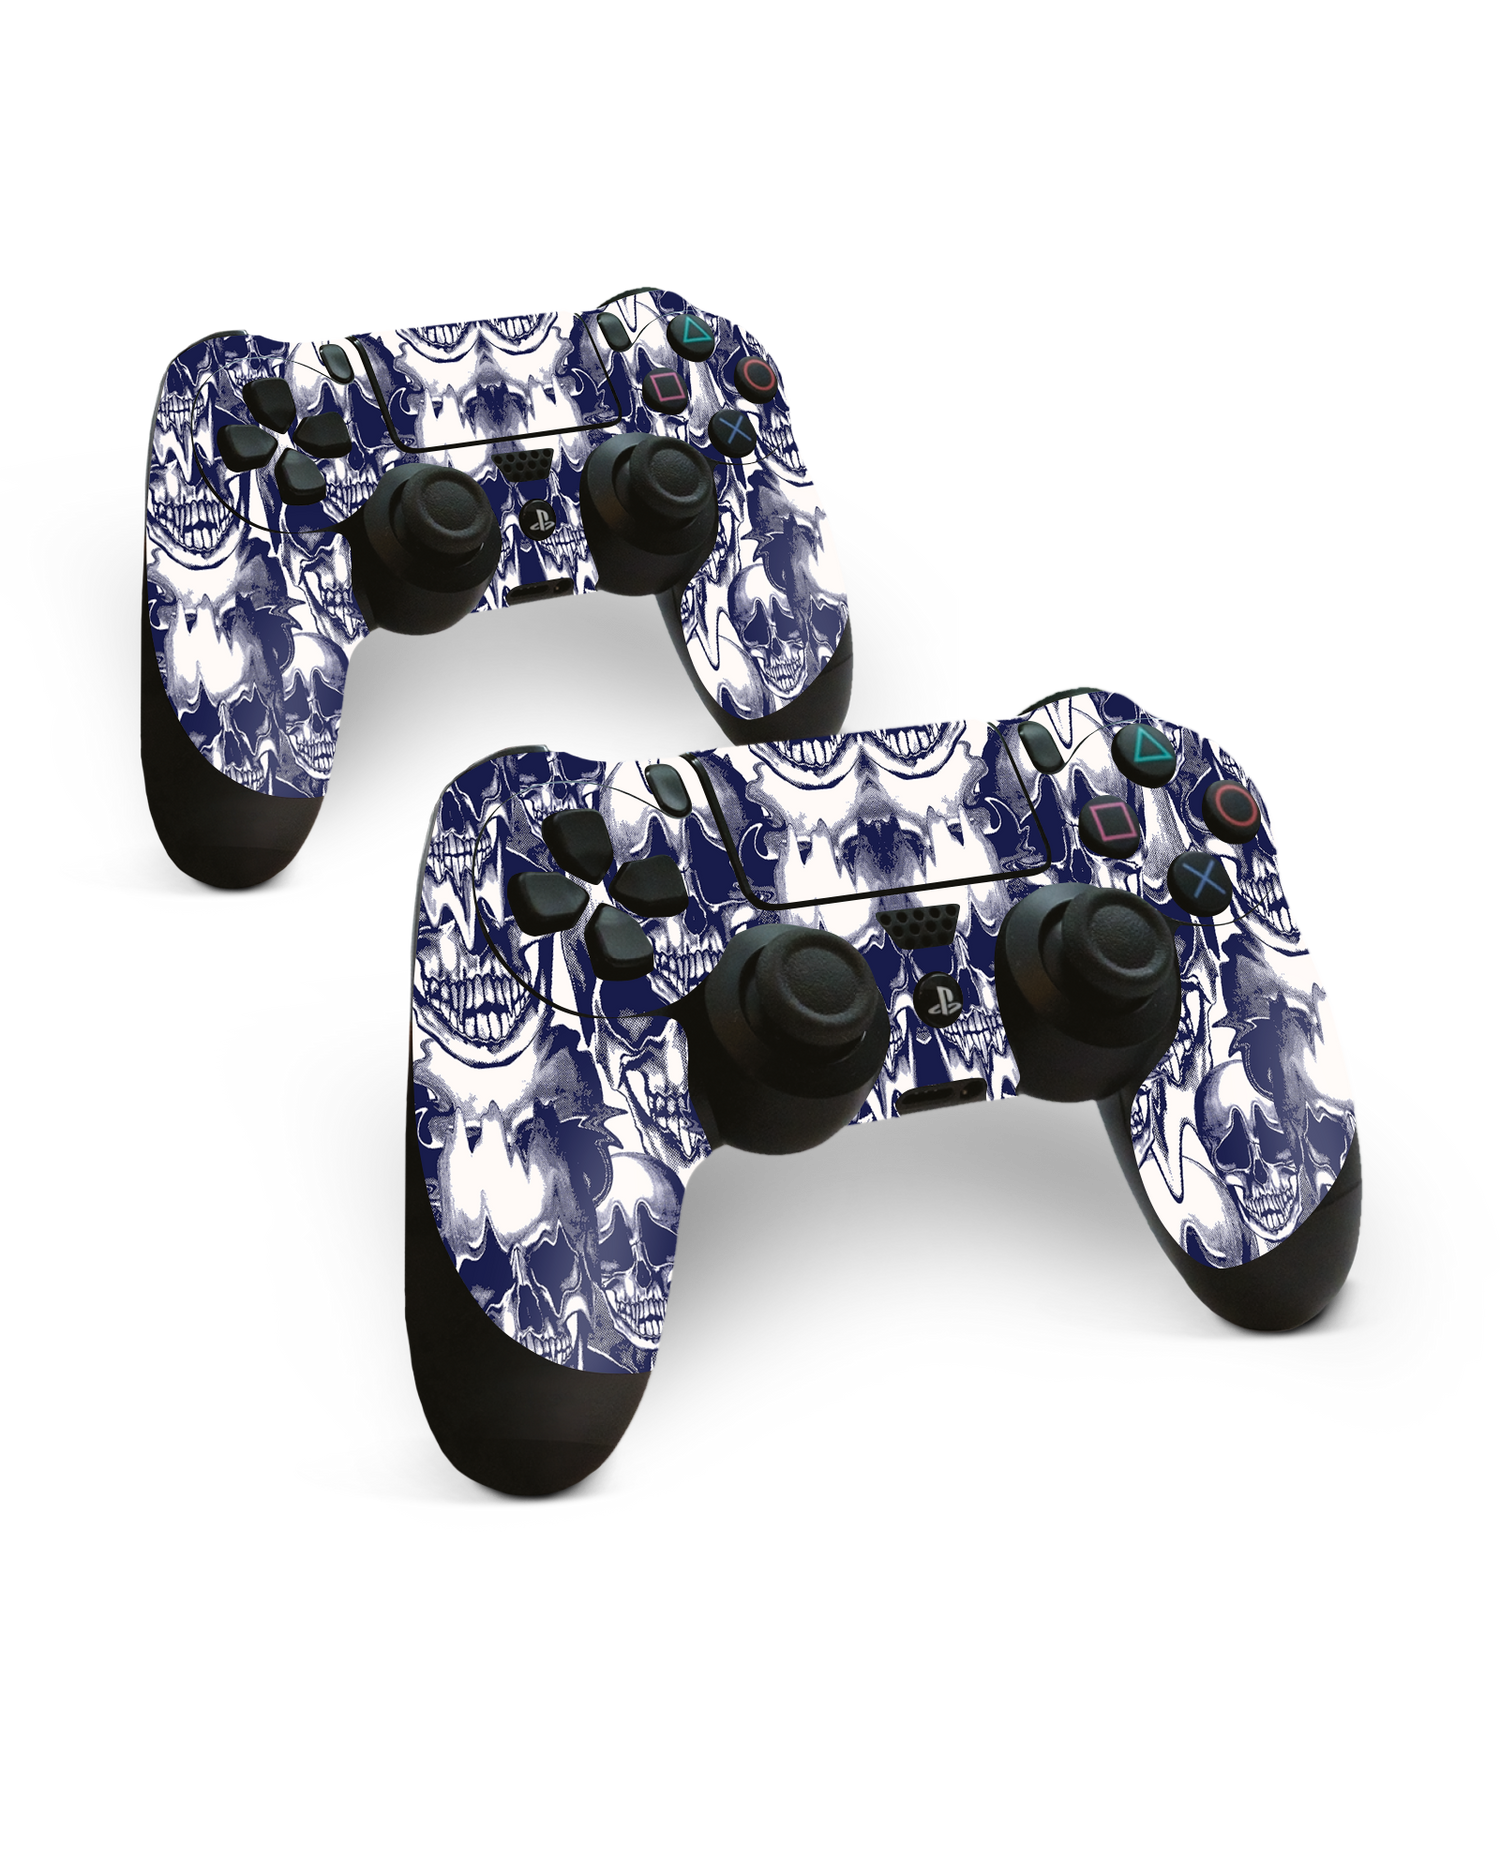 Warped Skulls Console Skin for Sony PlayStation 4 Controller: Side View